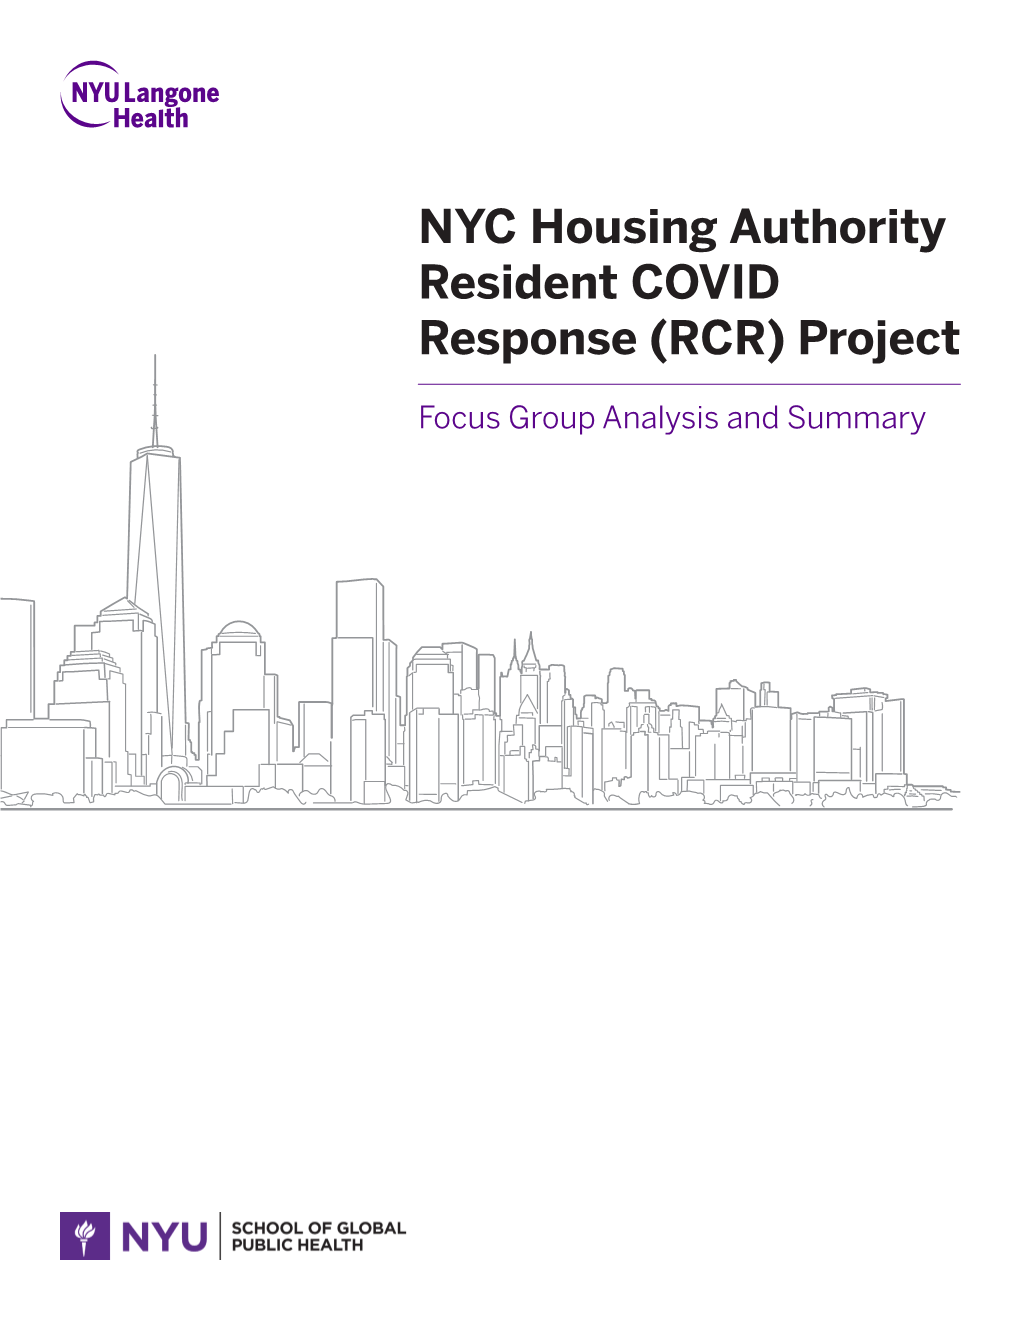 NYC Housing Authority Resident COVID Response (RCR) Project